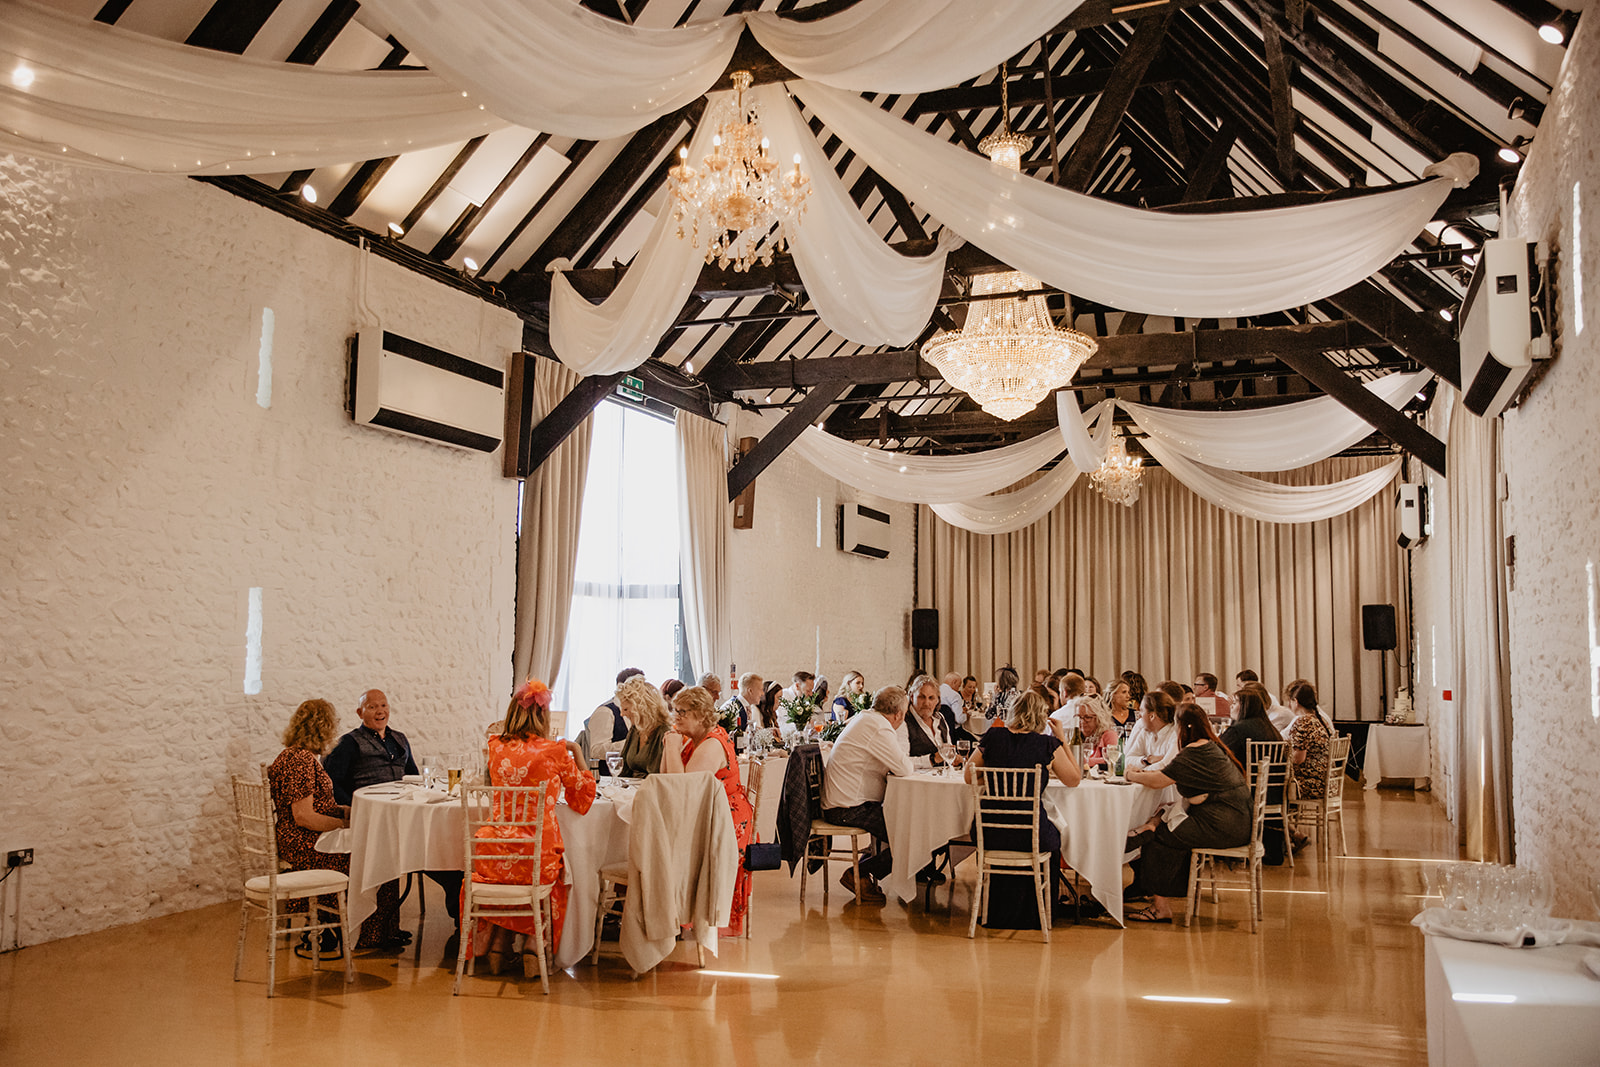 Wedding Reception Speeches at a Field Place Manor House Wedding in Worthing, Sussex. By Olive Joy Photography